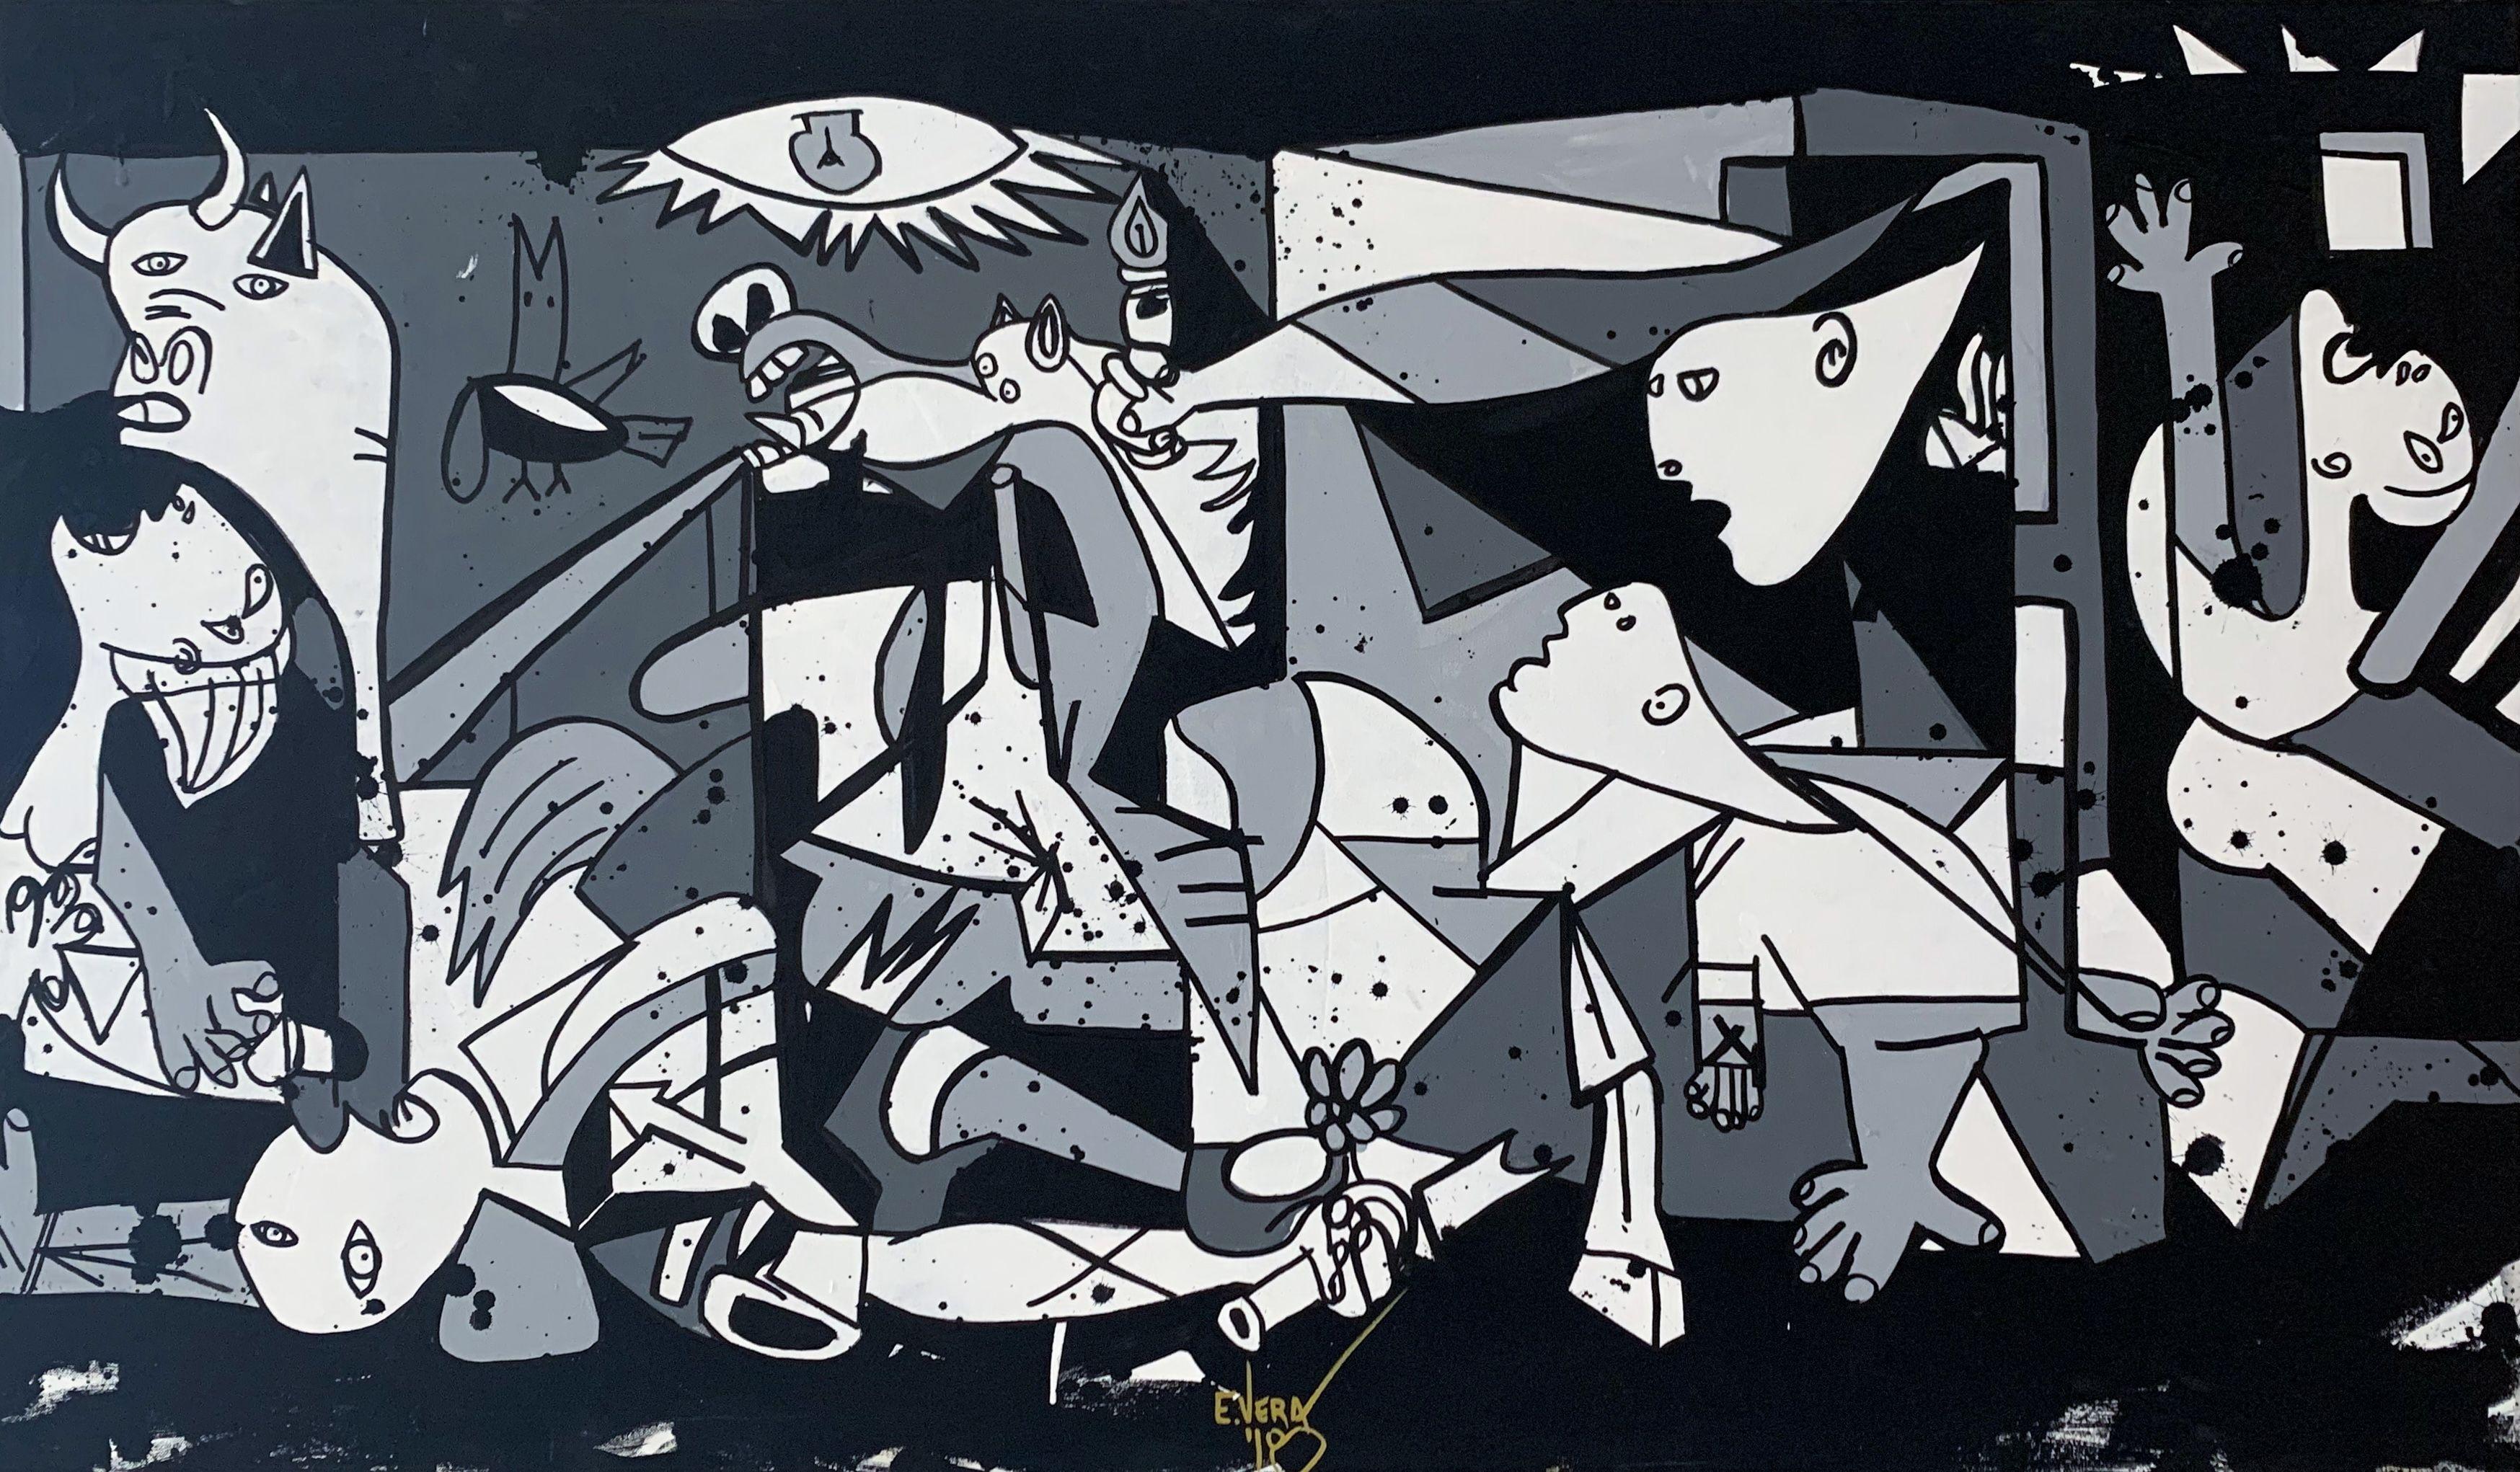 Pablo Picasso's Guernica painting inspired, great colors, acrylic and spray on canvas, great artwork, exhibitions in the best Art Galleries in France, USA and Mexico. :: Painting :: Cubism :: This piece comes with an official certificate of